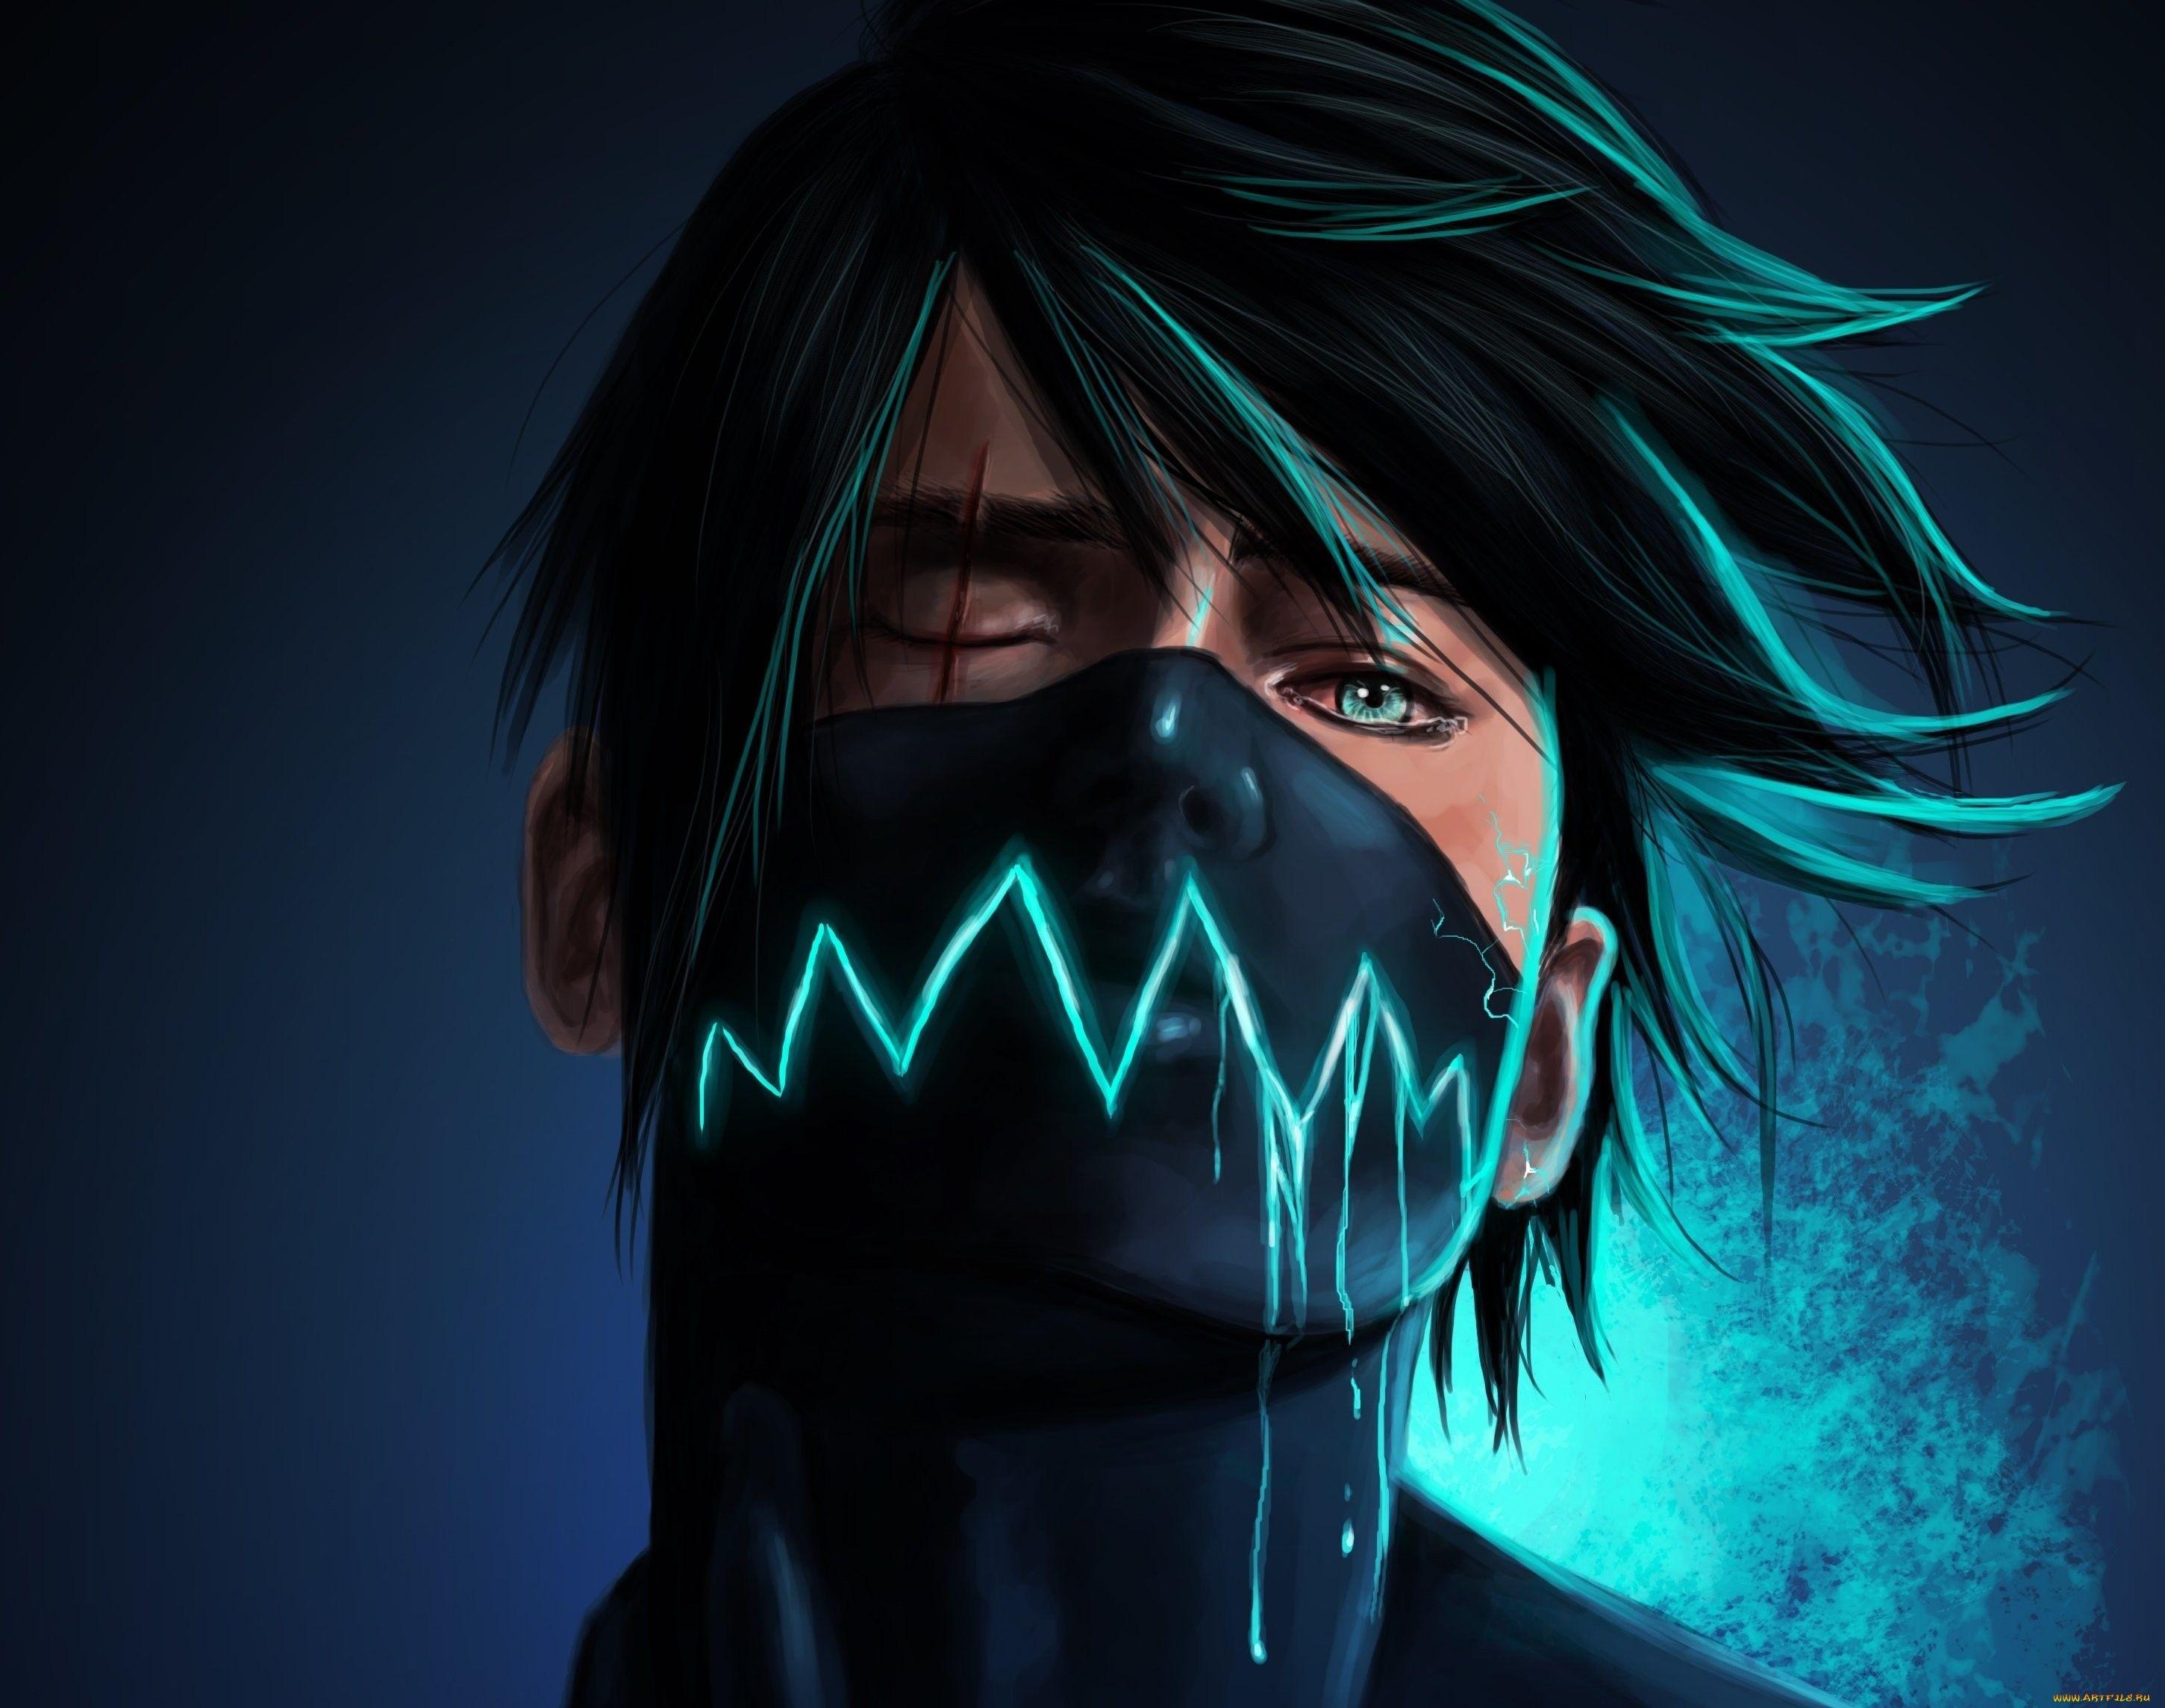 Anime Boy Mask Wallpapers  Top Free Anime Boy Mask Backgrounds   WallpaperAccess